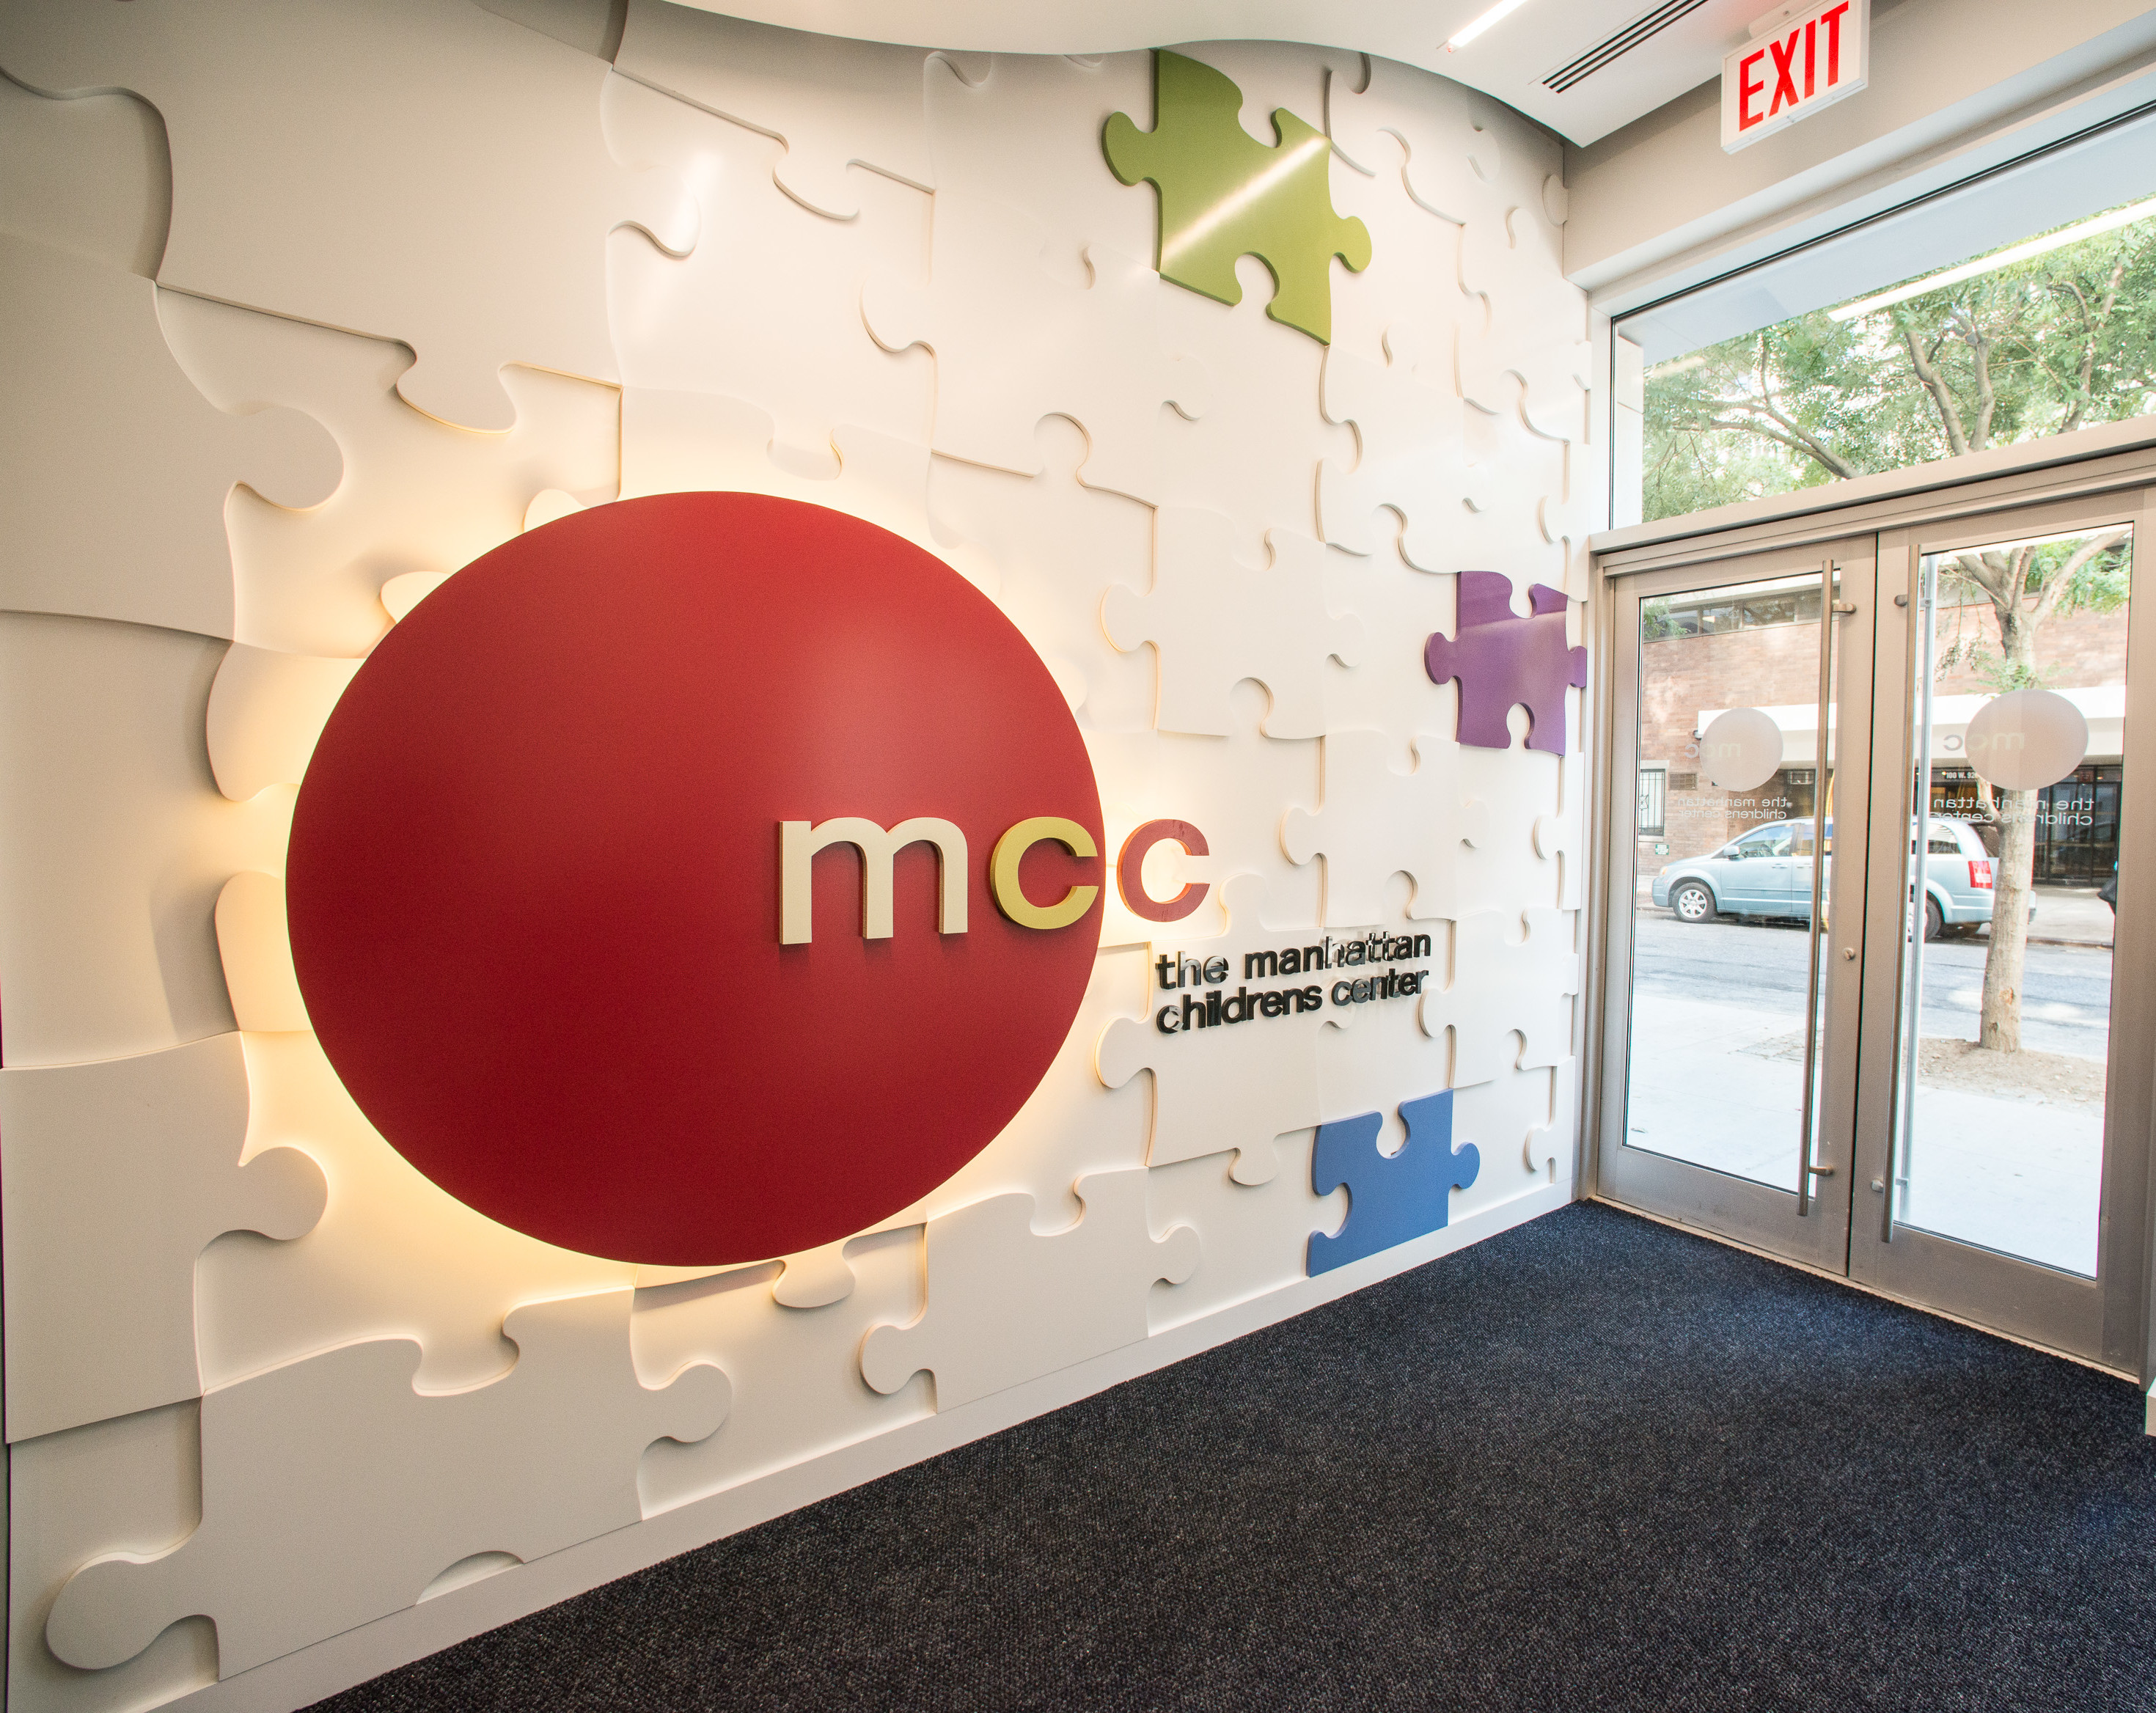 Talisen Construction Corporation: Construction Management and General Contractor. MCC logo in puzzle-piece themed wall design.